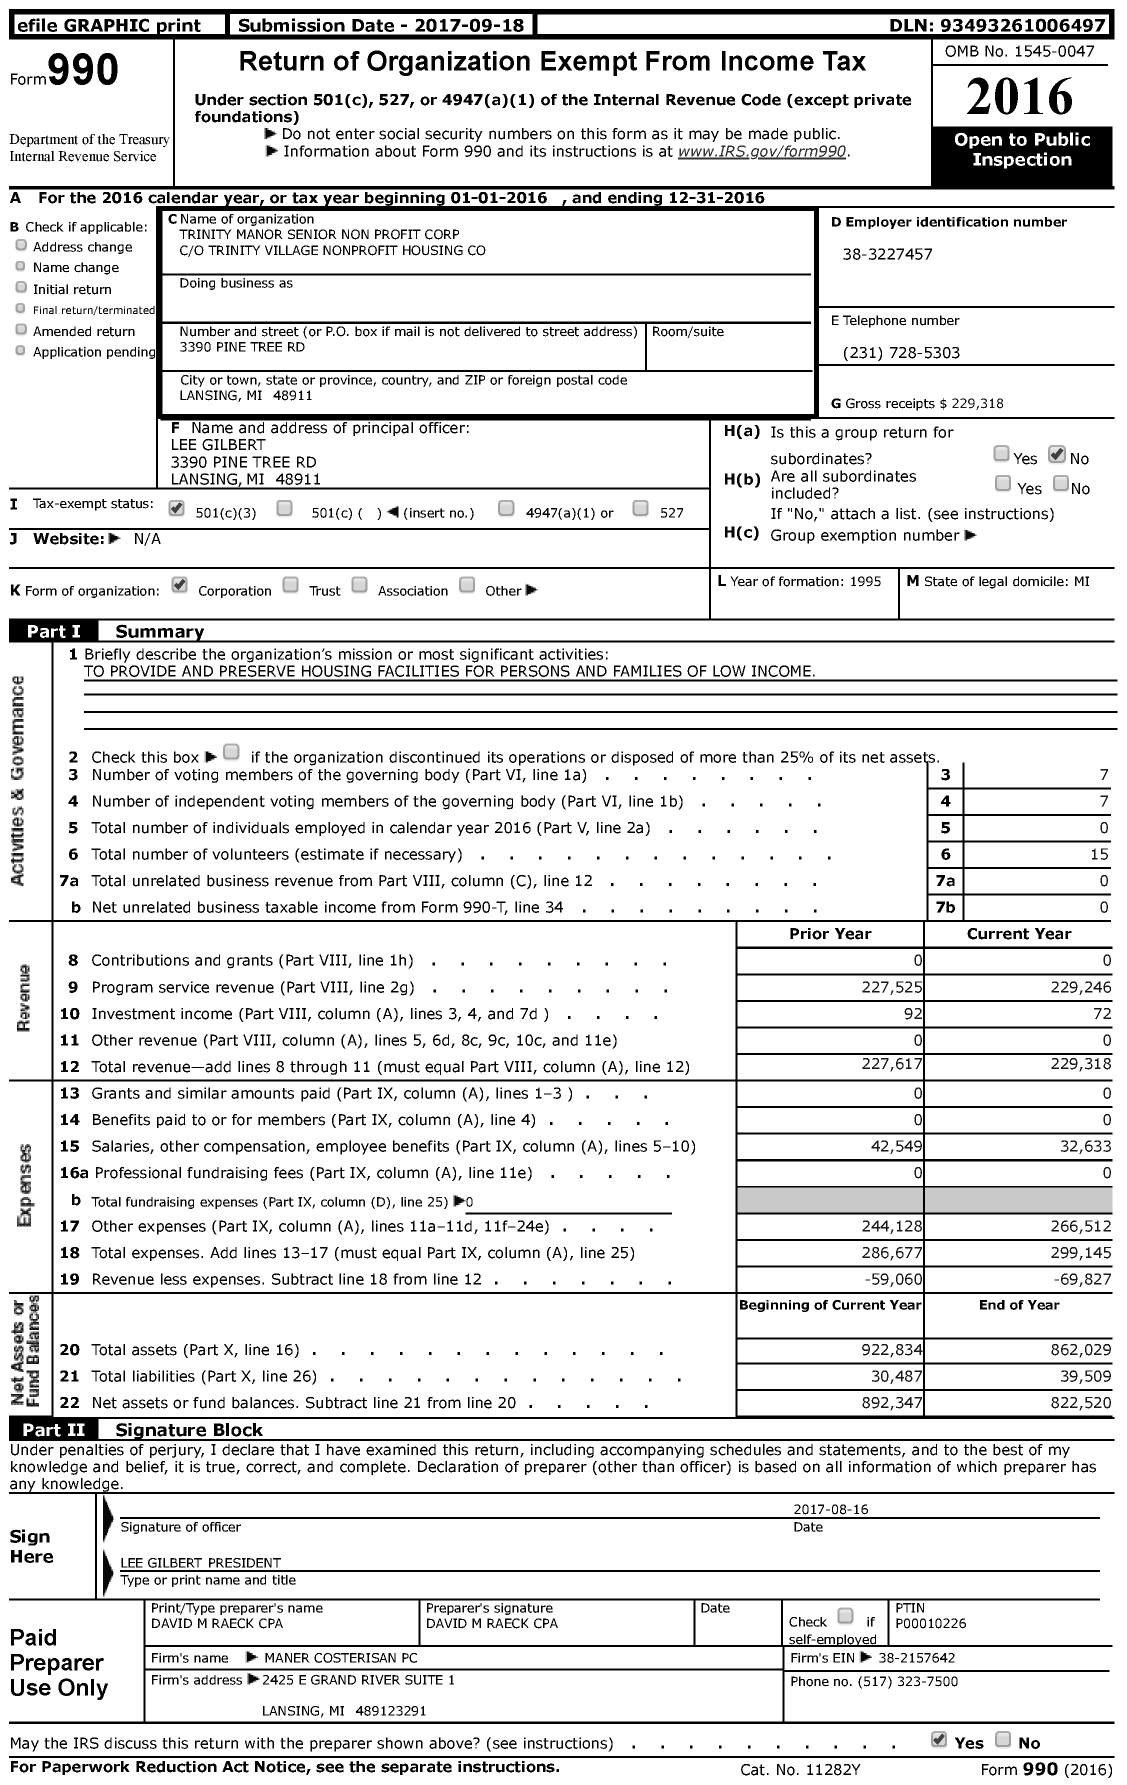 Image of first page of 2016 Form 990 for Trinity Manor Senior Non Profit Housing Corporation